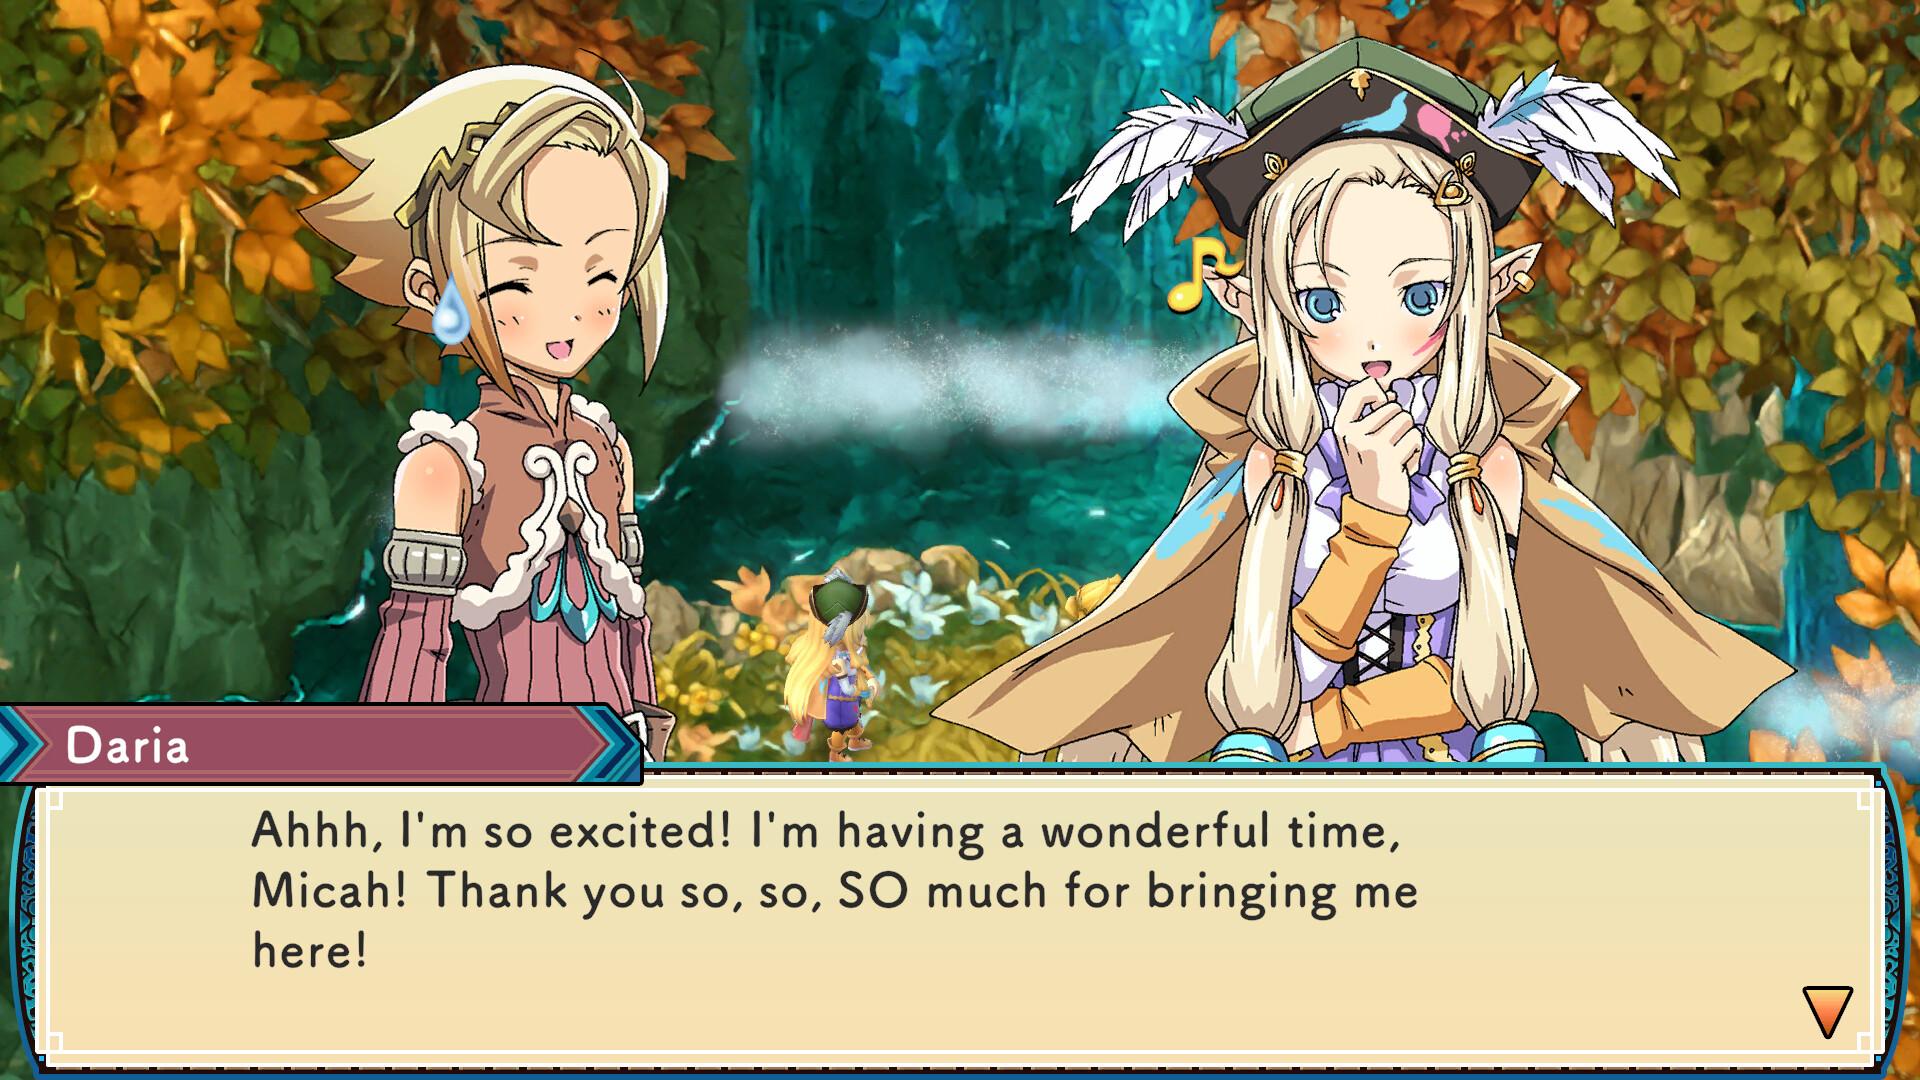 Screenshot №11 from game Rune Factory 3 Special